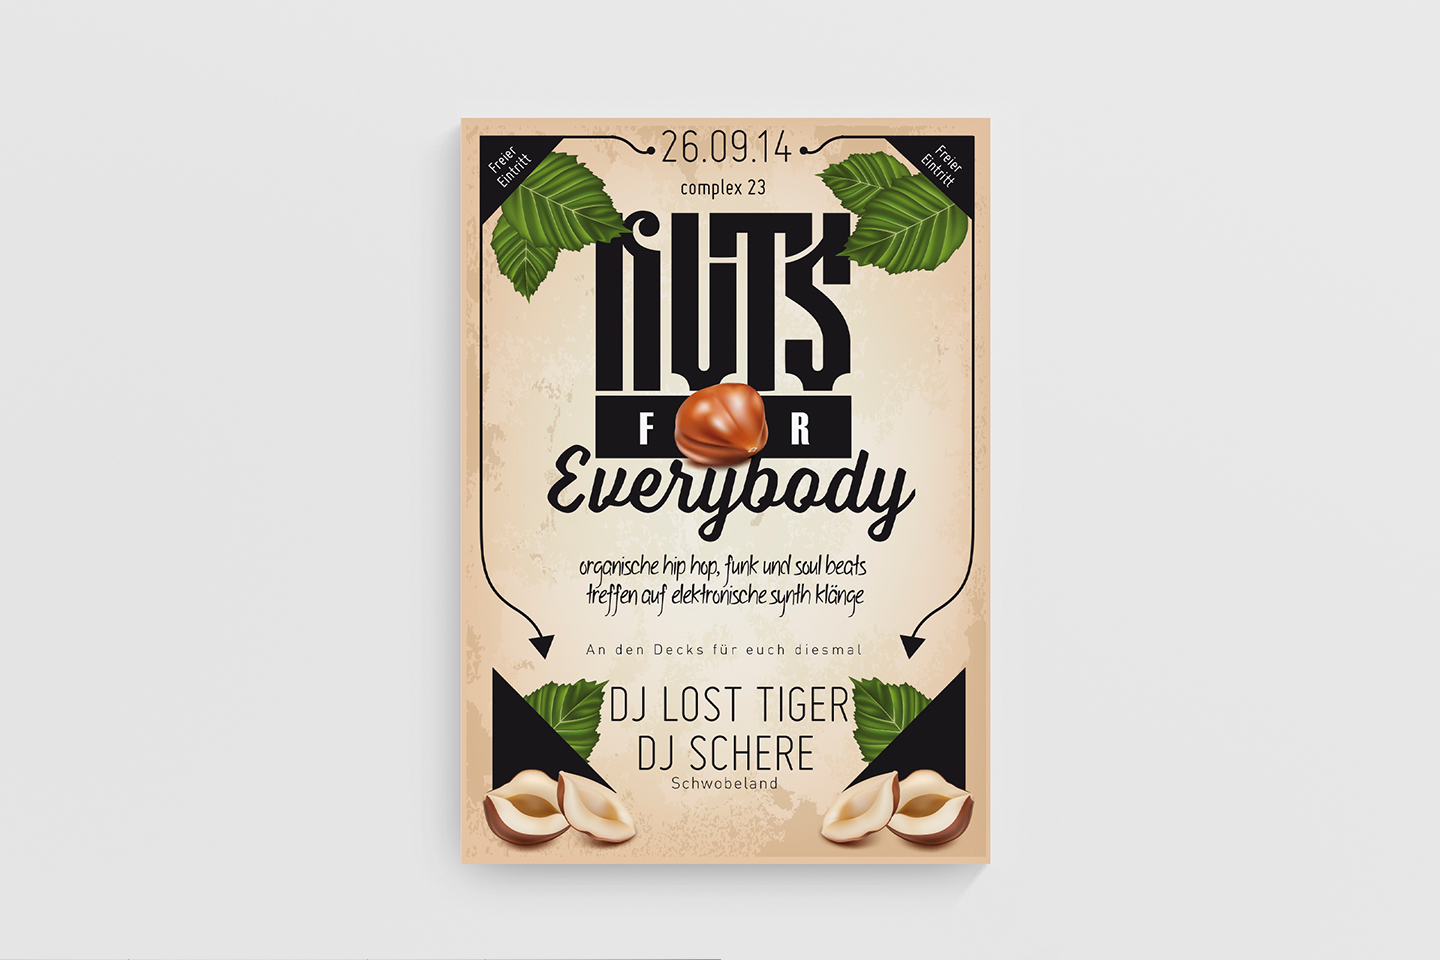 Nuts for everybody